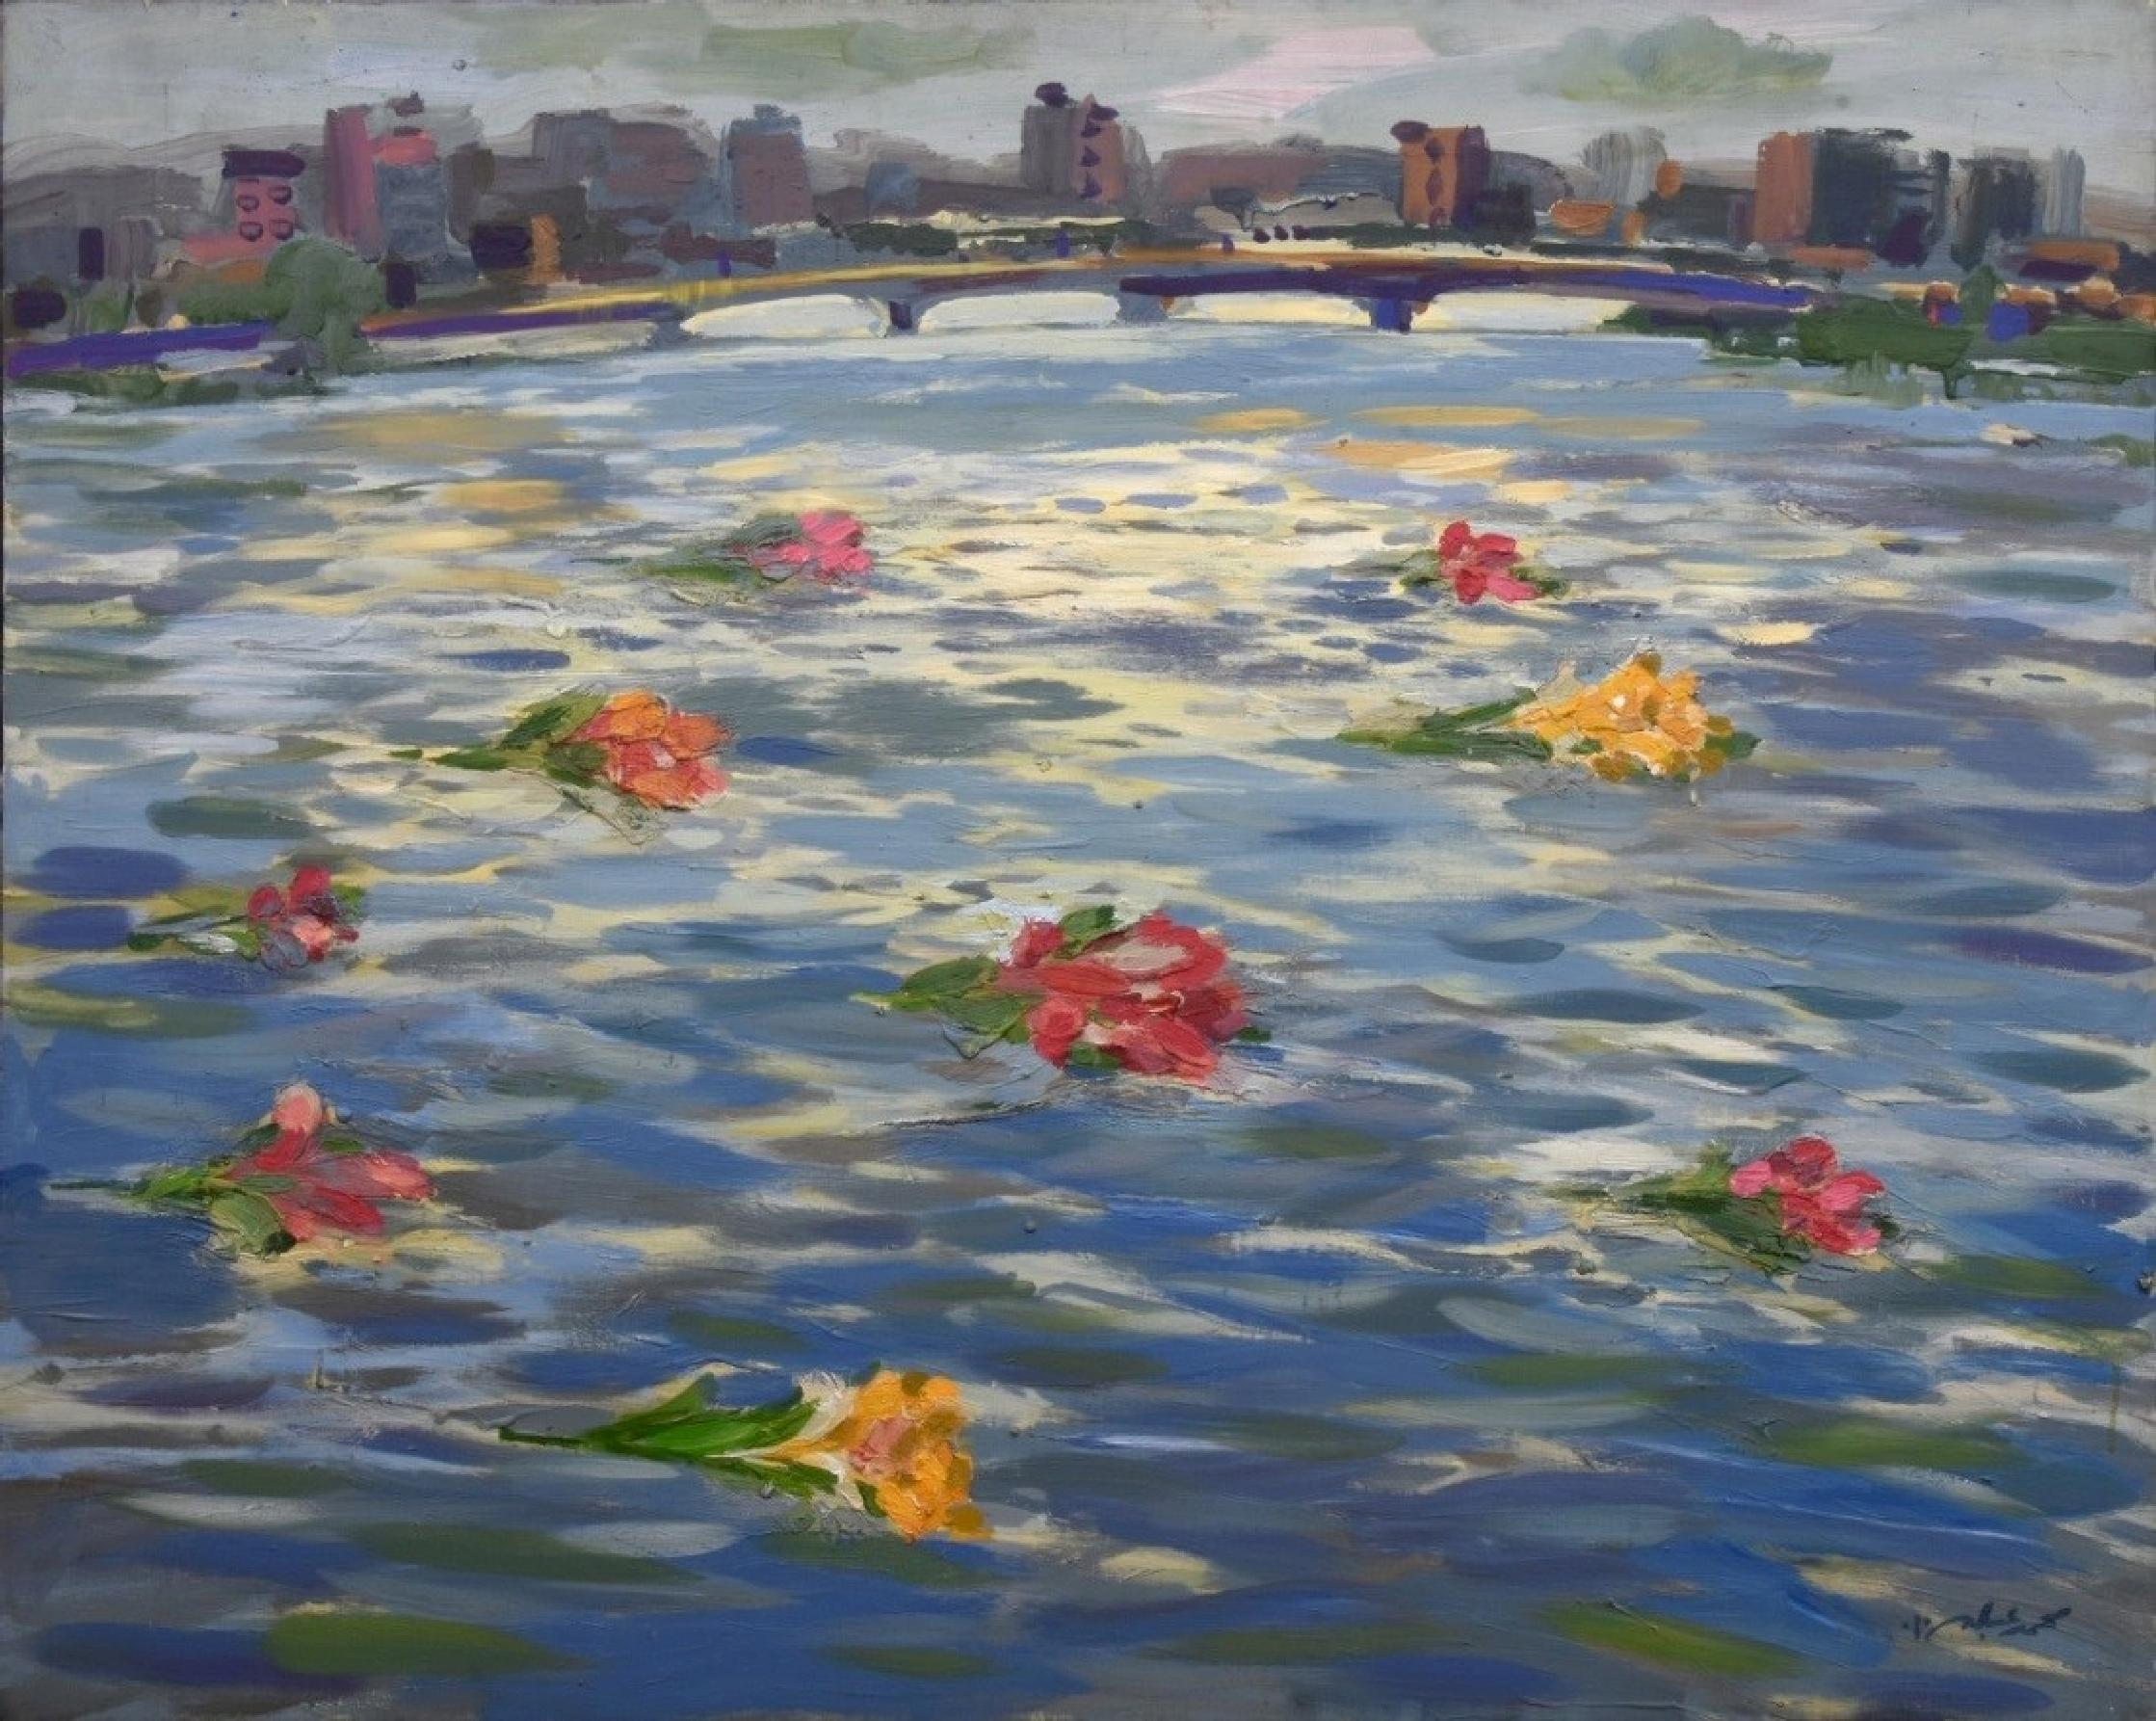 "Roses on the Nile III" Painting 47" x 59" inch by Mohamed Abla


Mohamed Abla was born in Mansoura (North of Egypt) in 1953. There he spent his childhood and finished school. In 1973 he moved to Alexandria to start a five-year art study at the